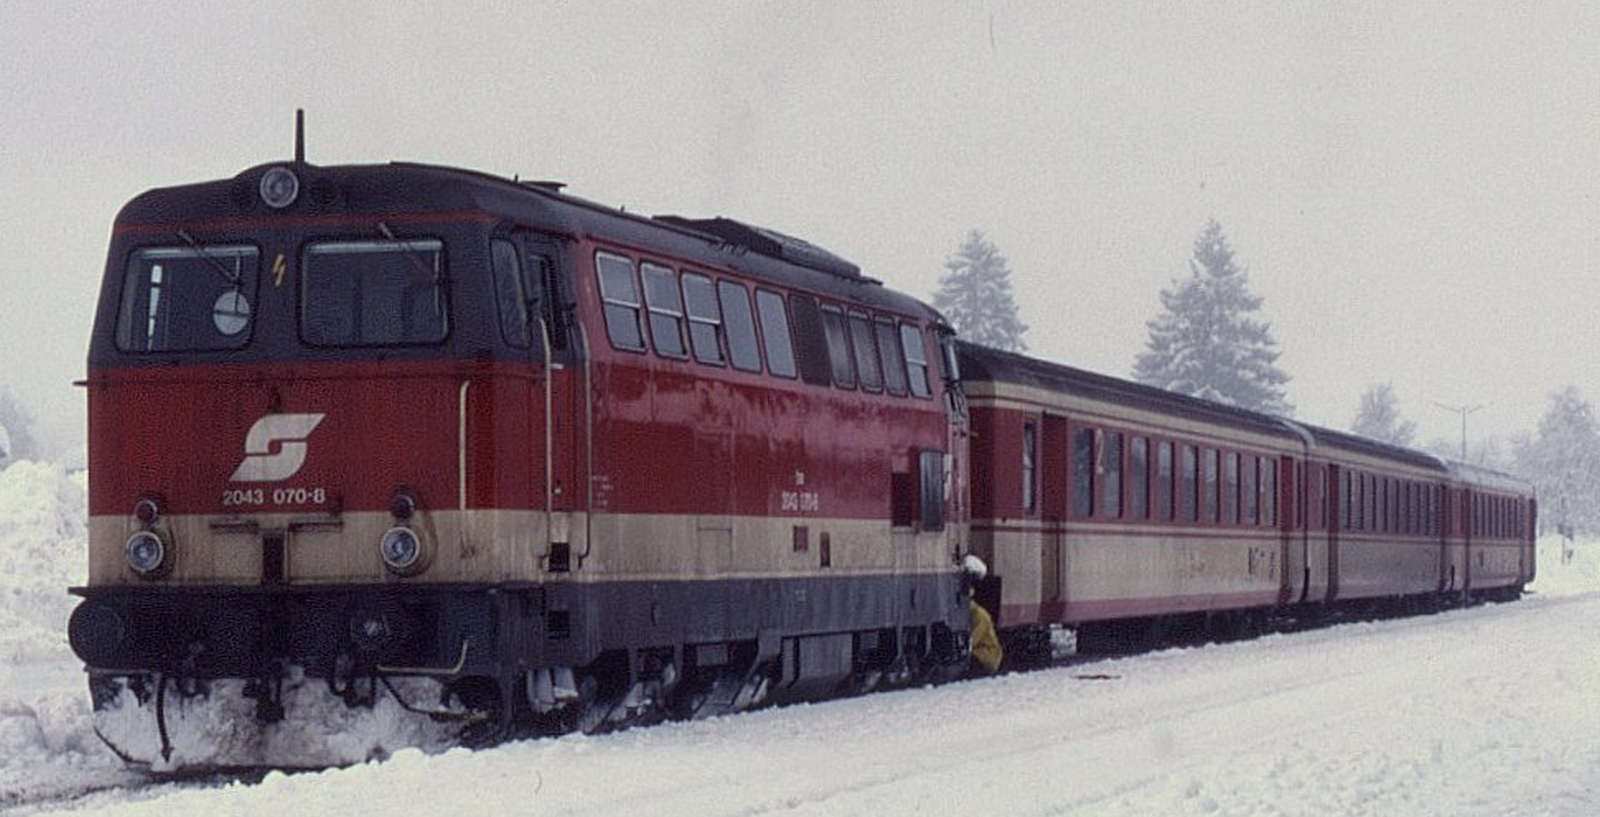 2043 070 in February 1991 in Kötschach-Mauthen